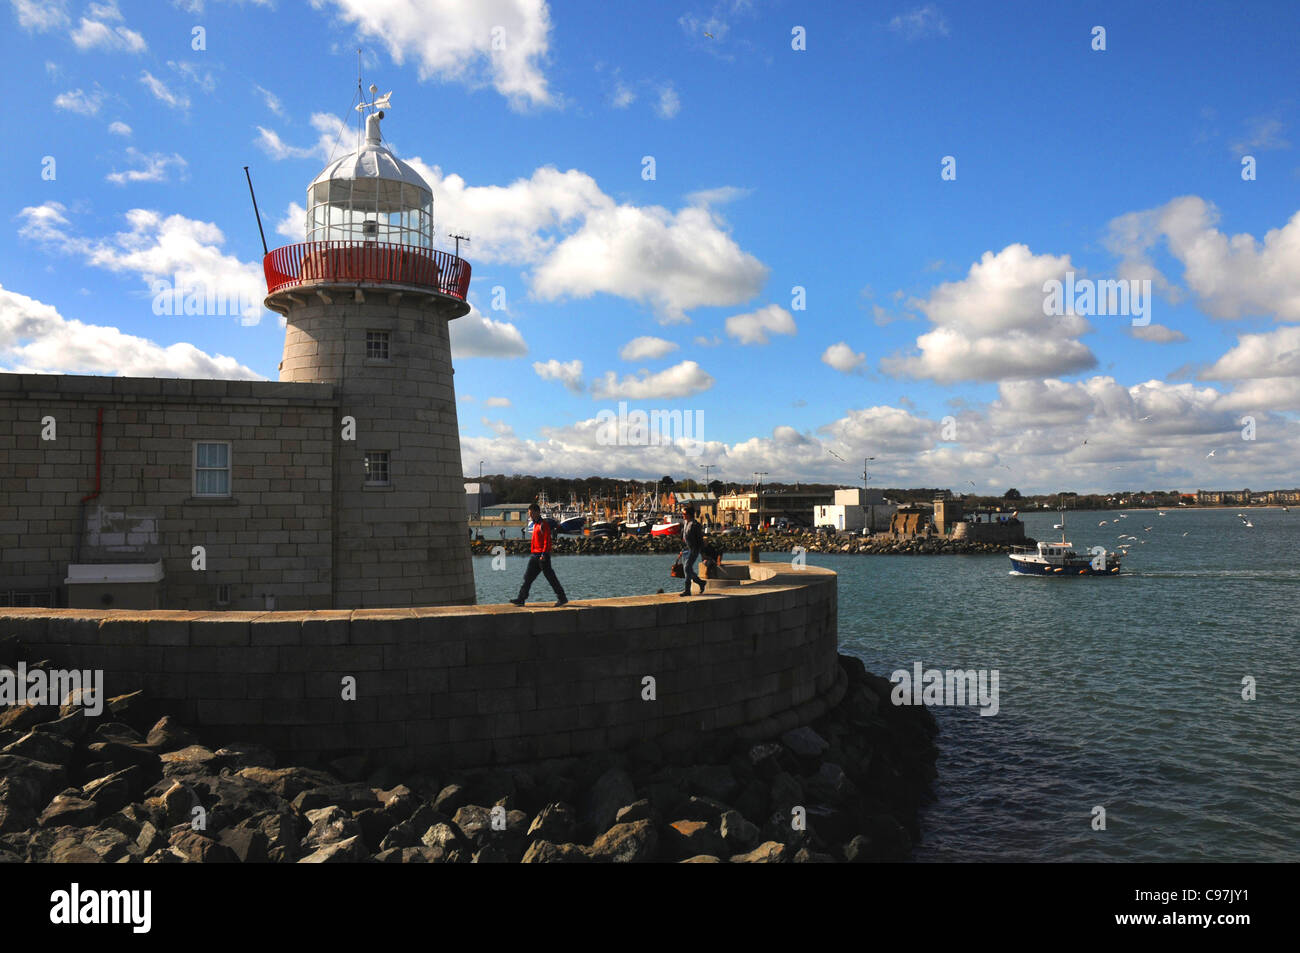 THE LIGHTHOUSE AT THE ENTRANCE TO THE HARBOUR AT LOWTH, SOUTHERN IRELAND Stock Photo